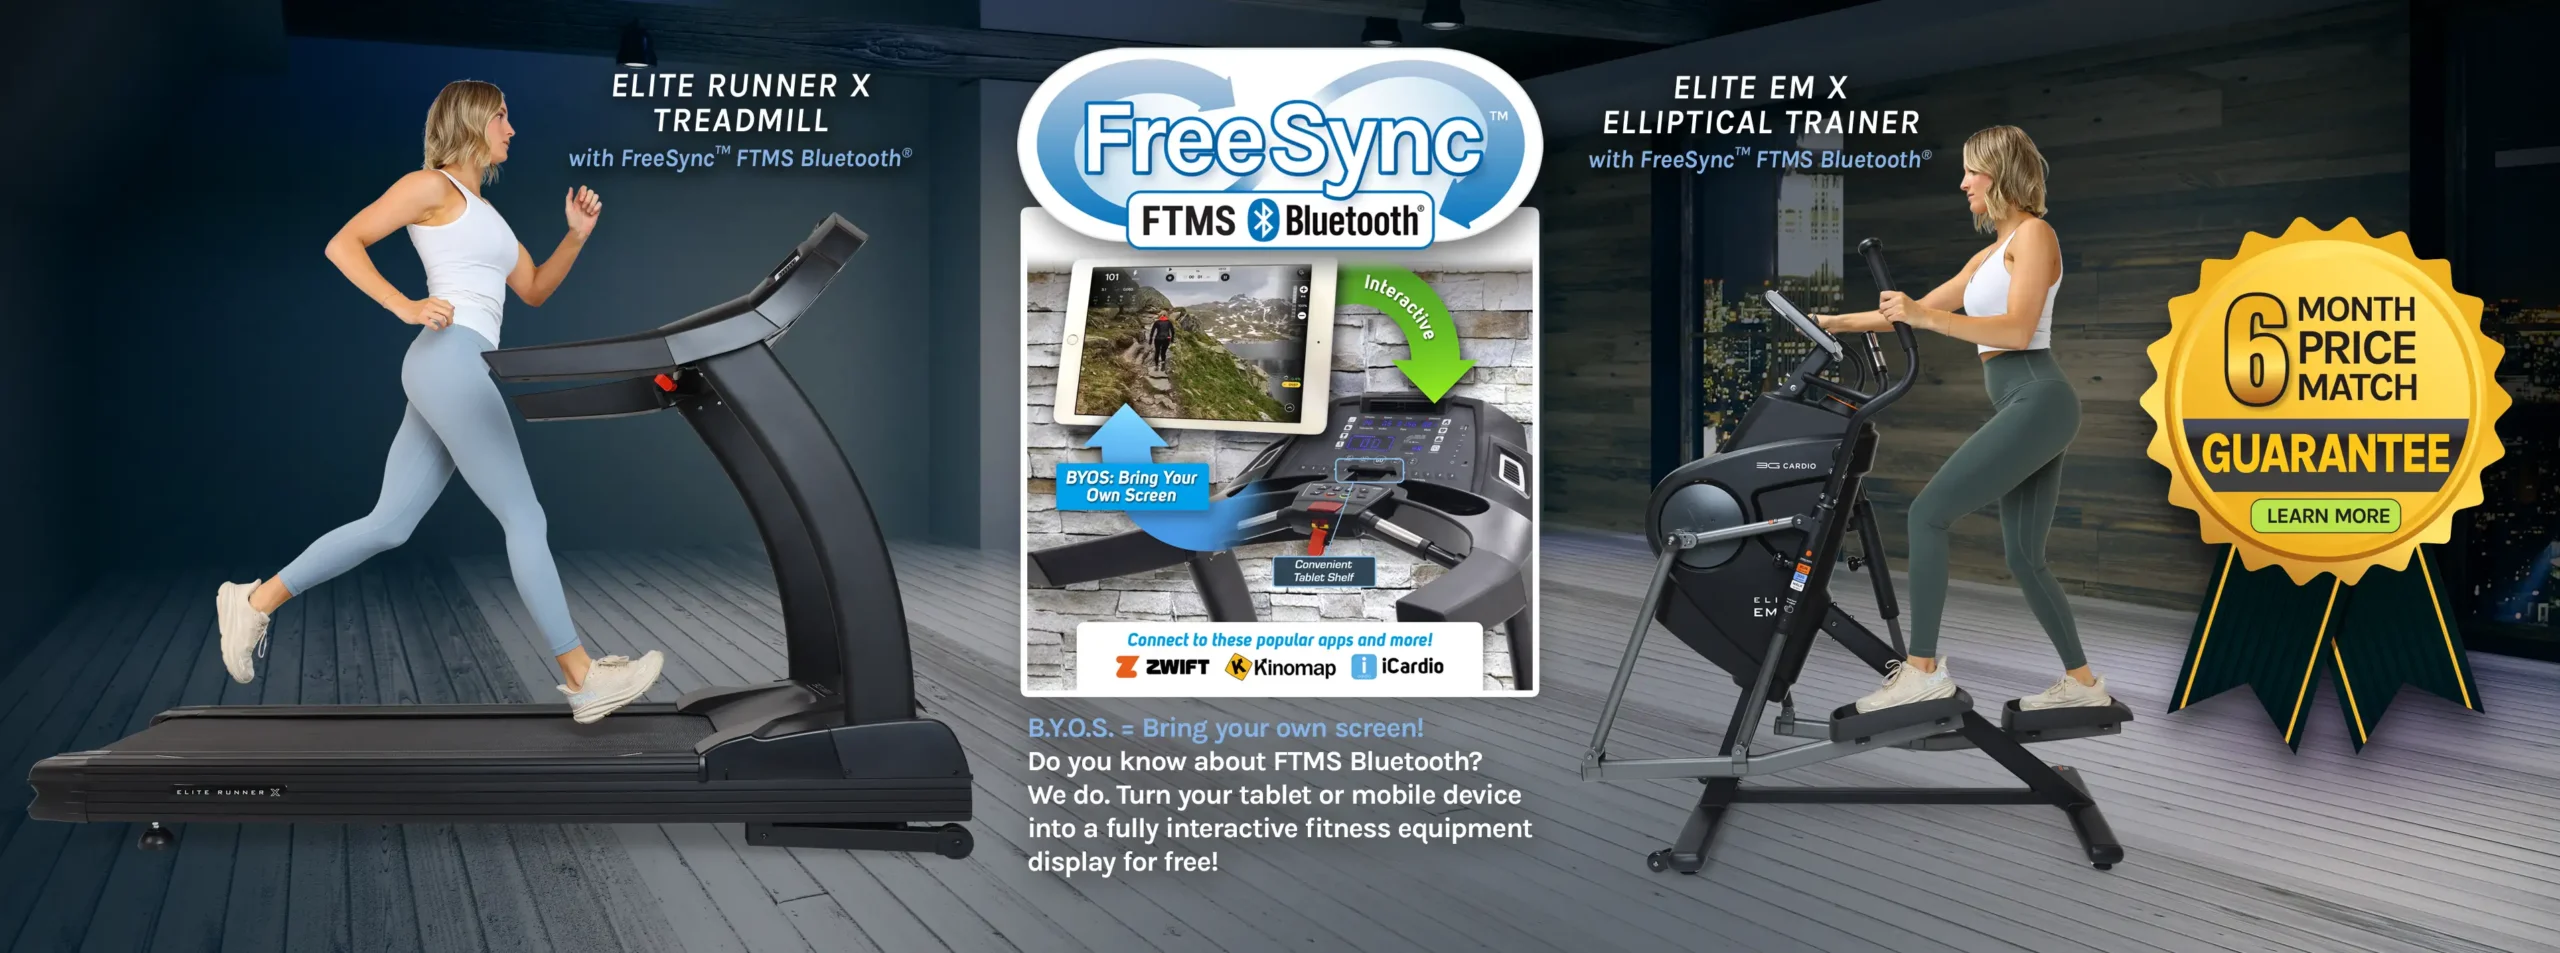 3G Cardio Fitness Equipment with our new FreeSync™ with FTMS Bluetooth®